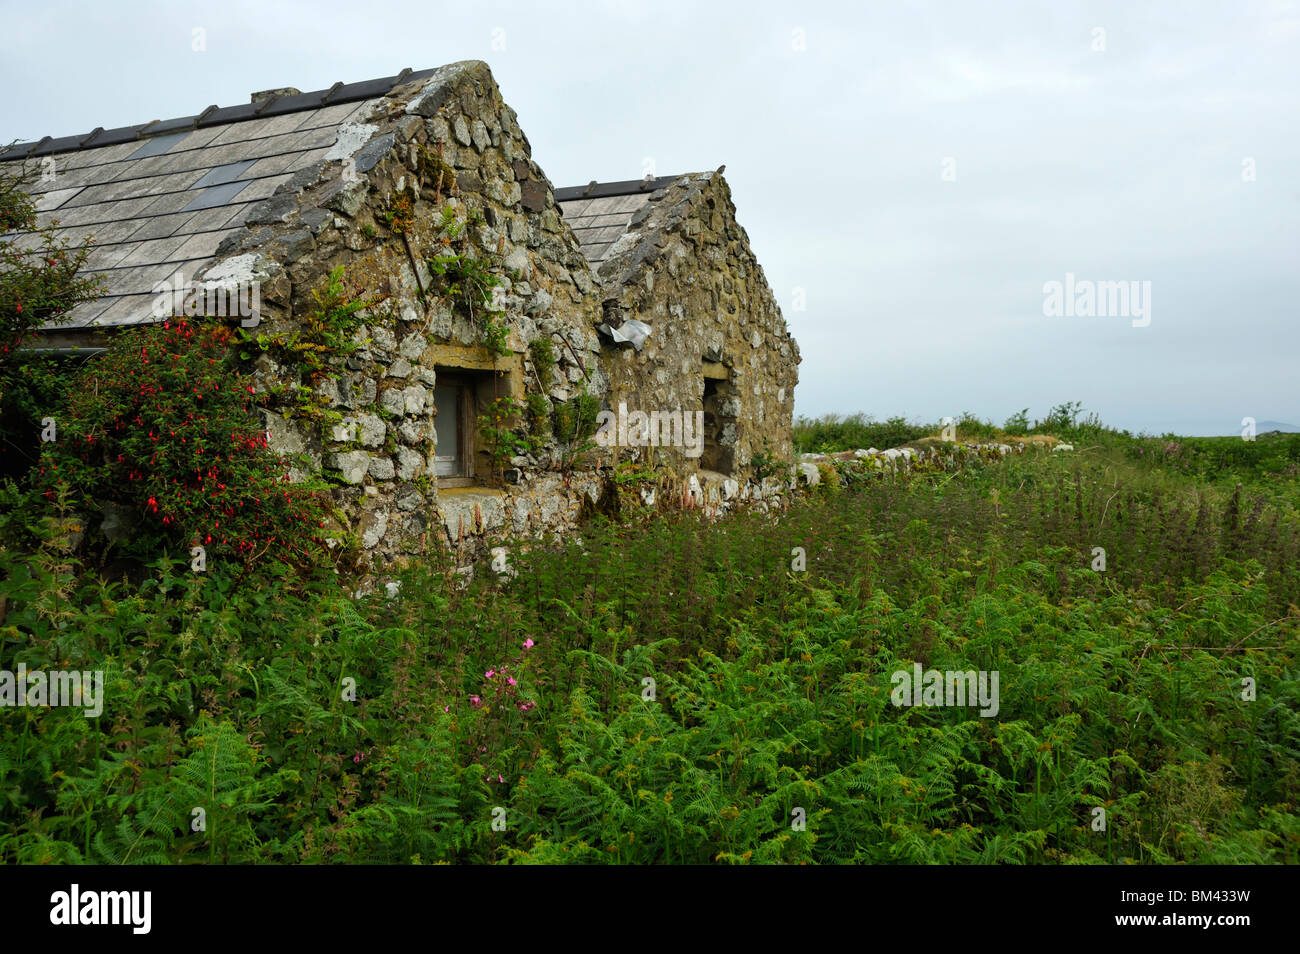 Part of the old farm house covered with lichens and mosses, standing among bracken, Skomer, Wales. Stock Photo